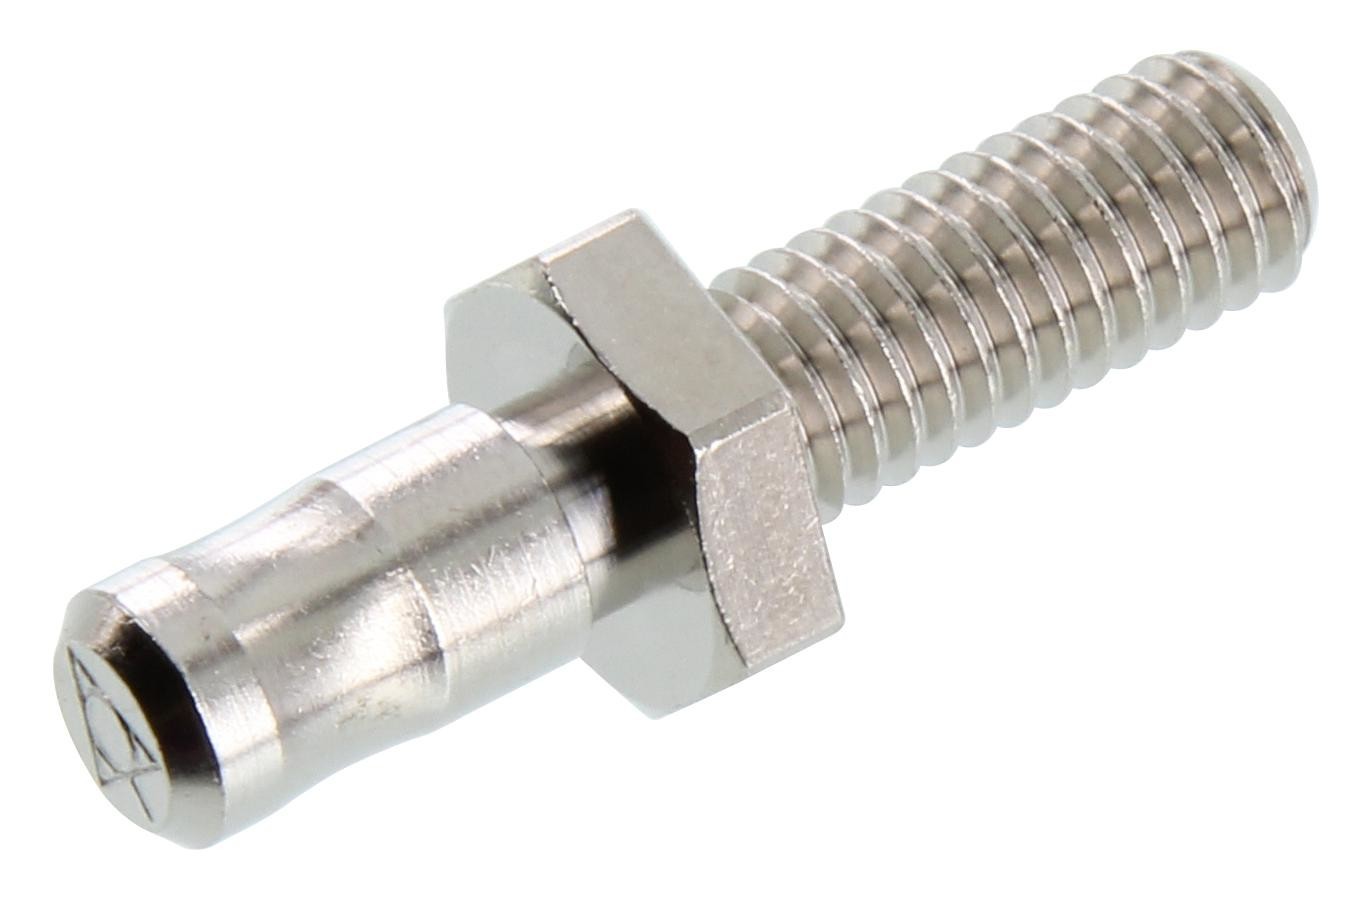 Staubli 04.0058 6mm Plug Connector, Potential Equalization, Brass, NIckle Plated, 40mm